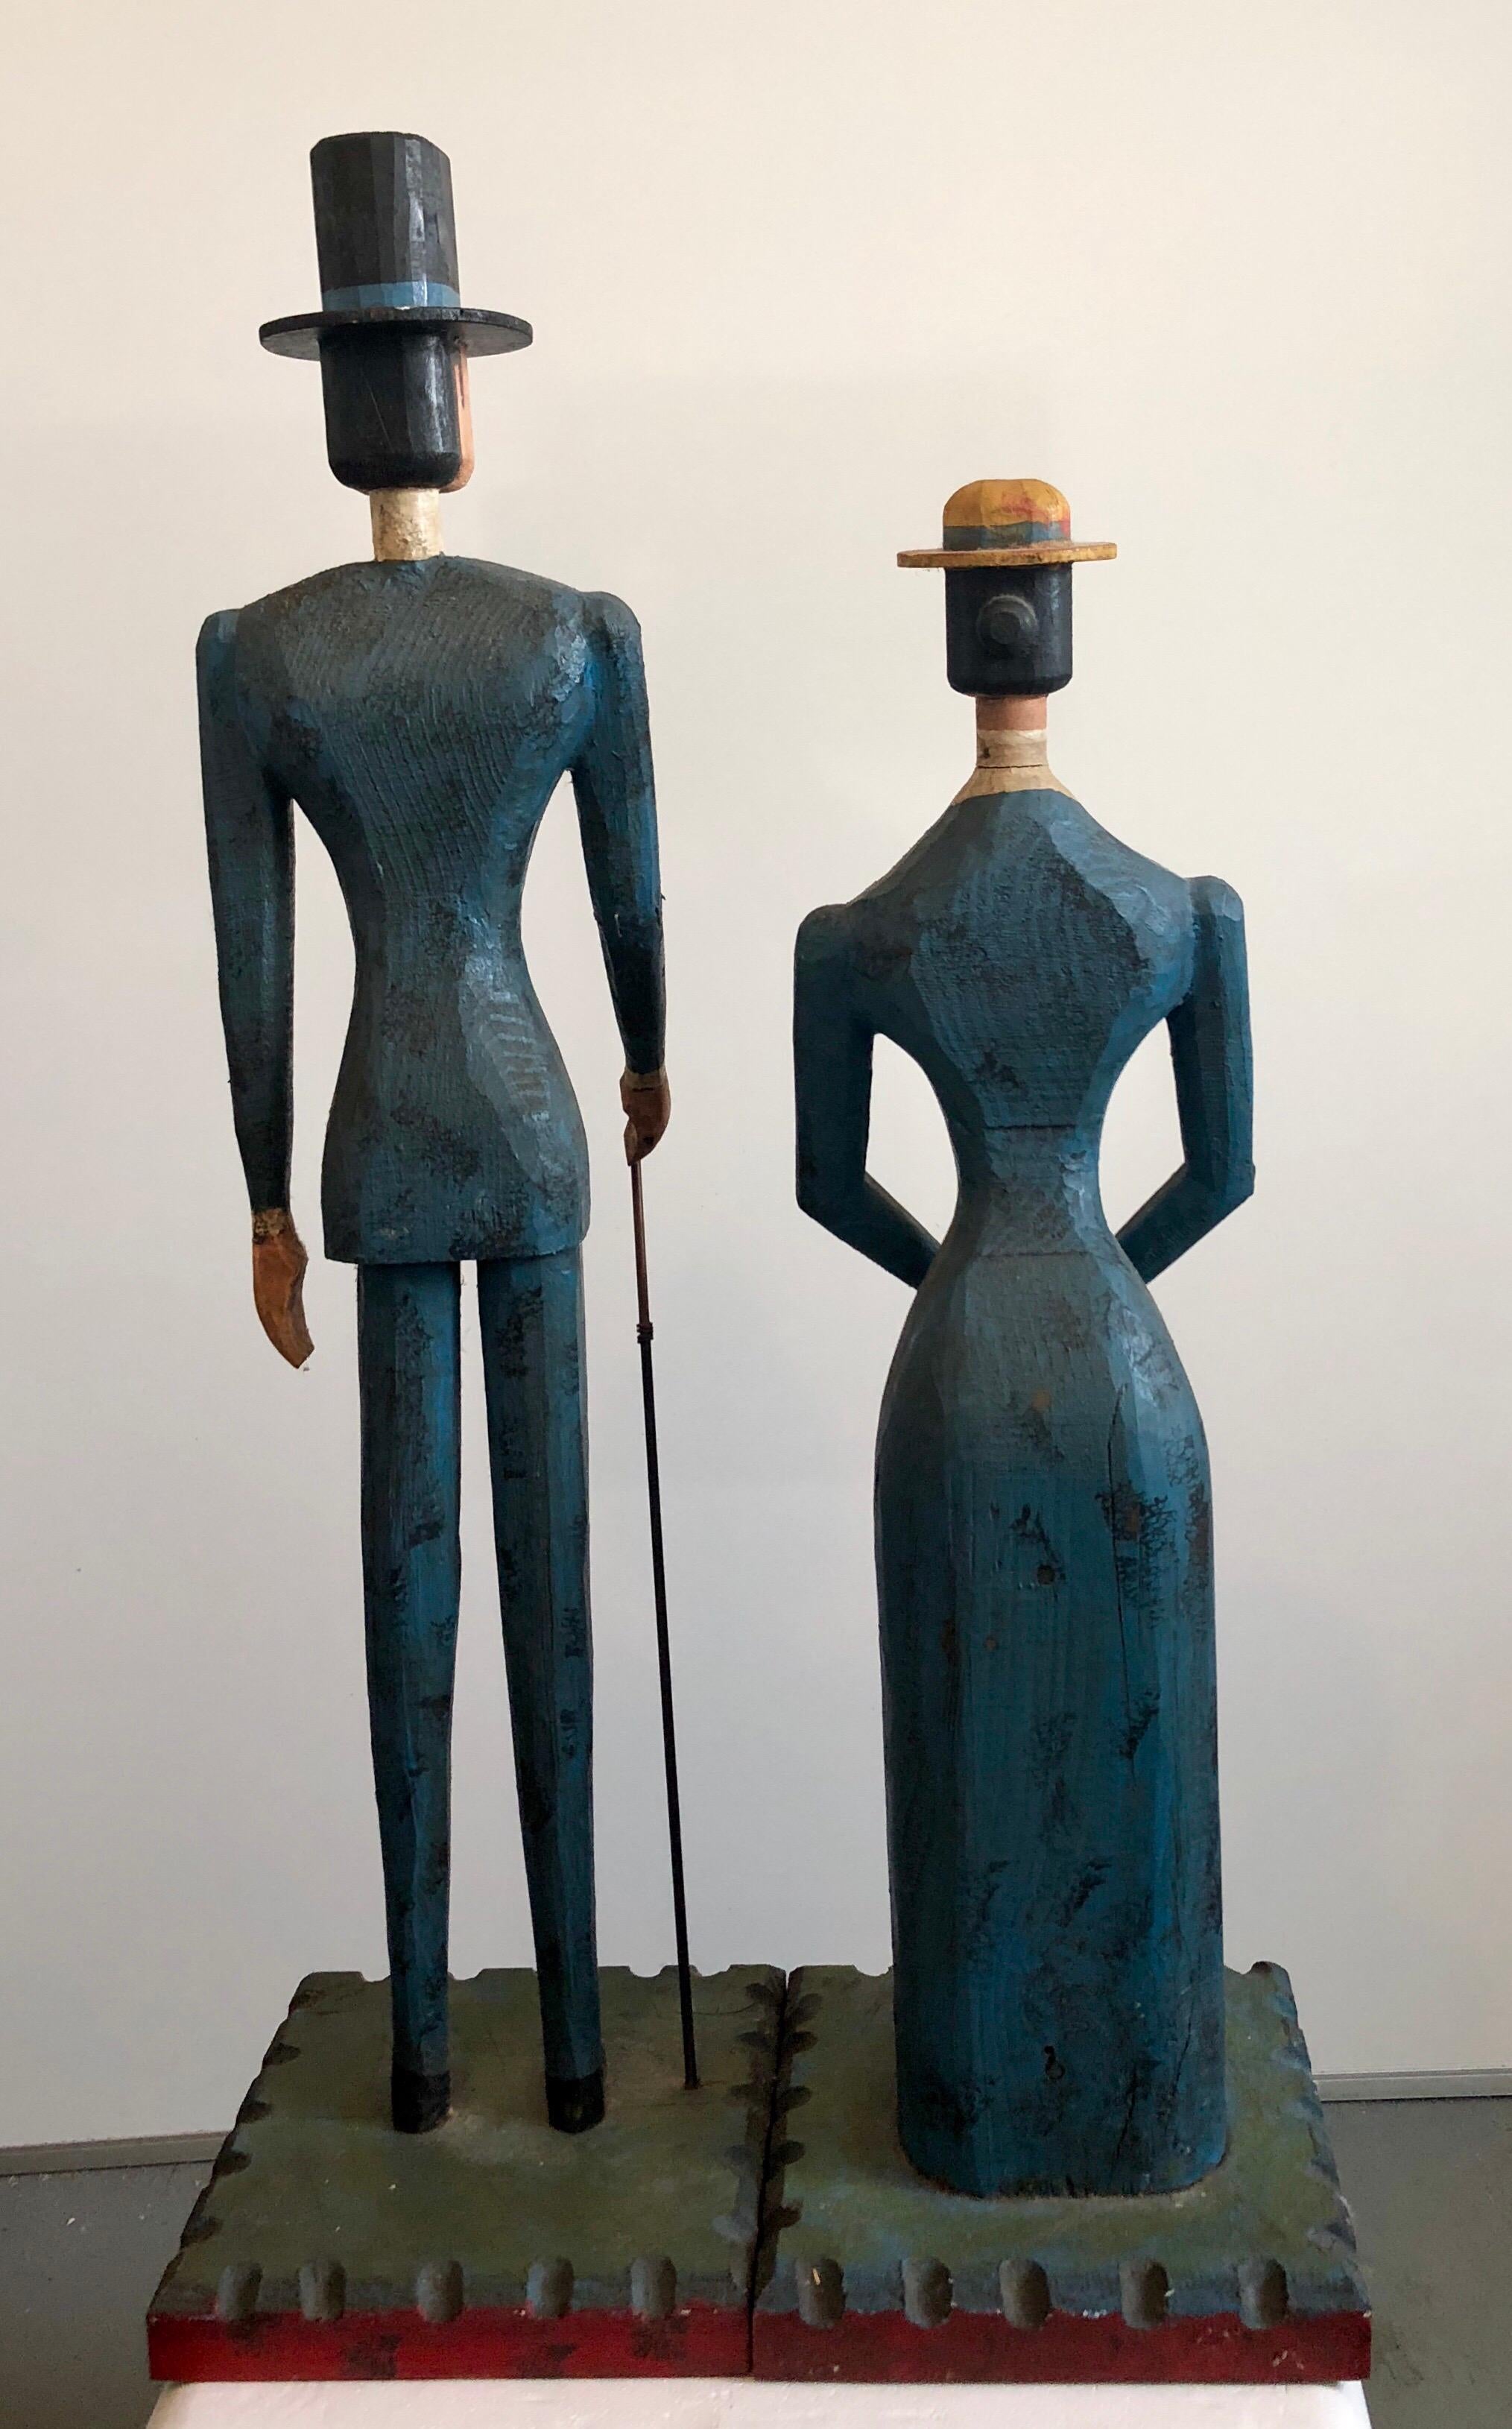 C. Jeré ( or Curtis Jere) is a metalwork artist of wall sculptures and household accessories.
C. Jeré works are made by Artisan House. Curtis Jere is a compound nom de plume of artists Curtis Freiler and Jerry Fels. The two founders combined pieces